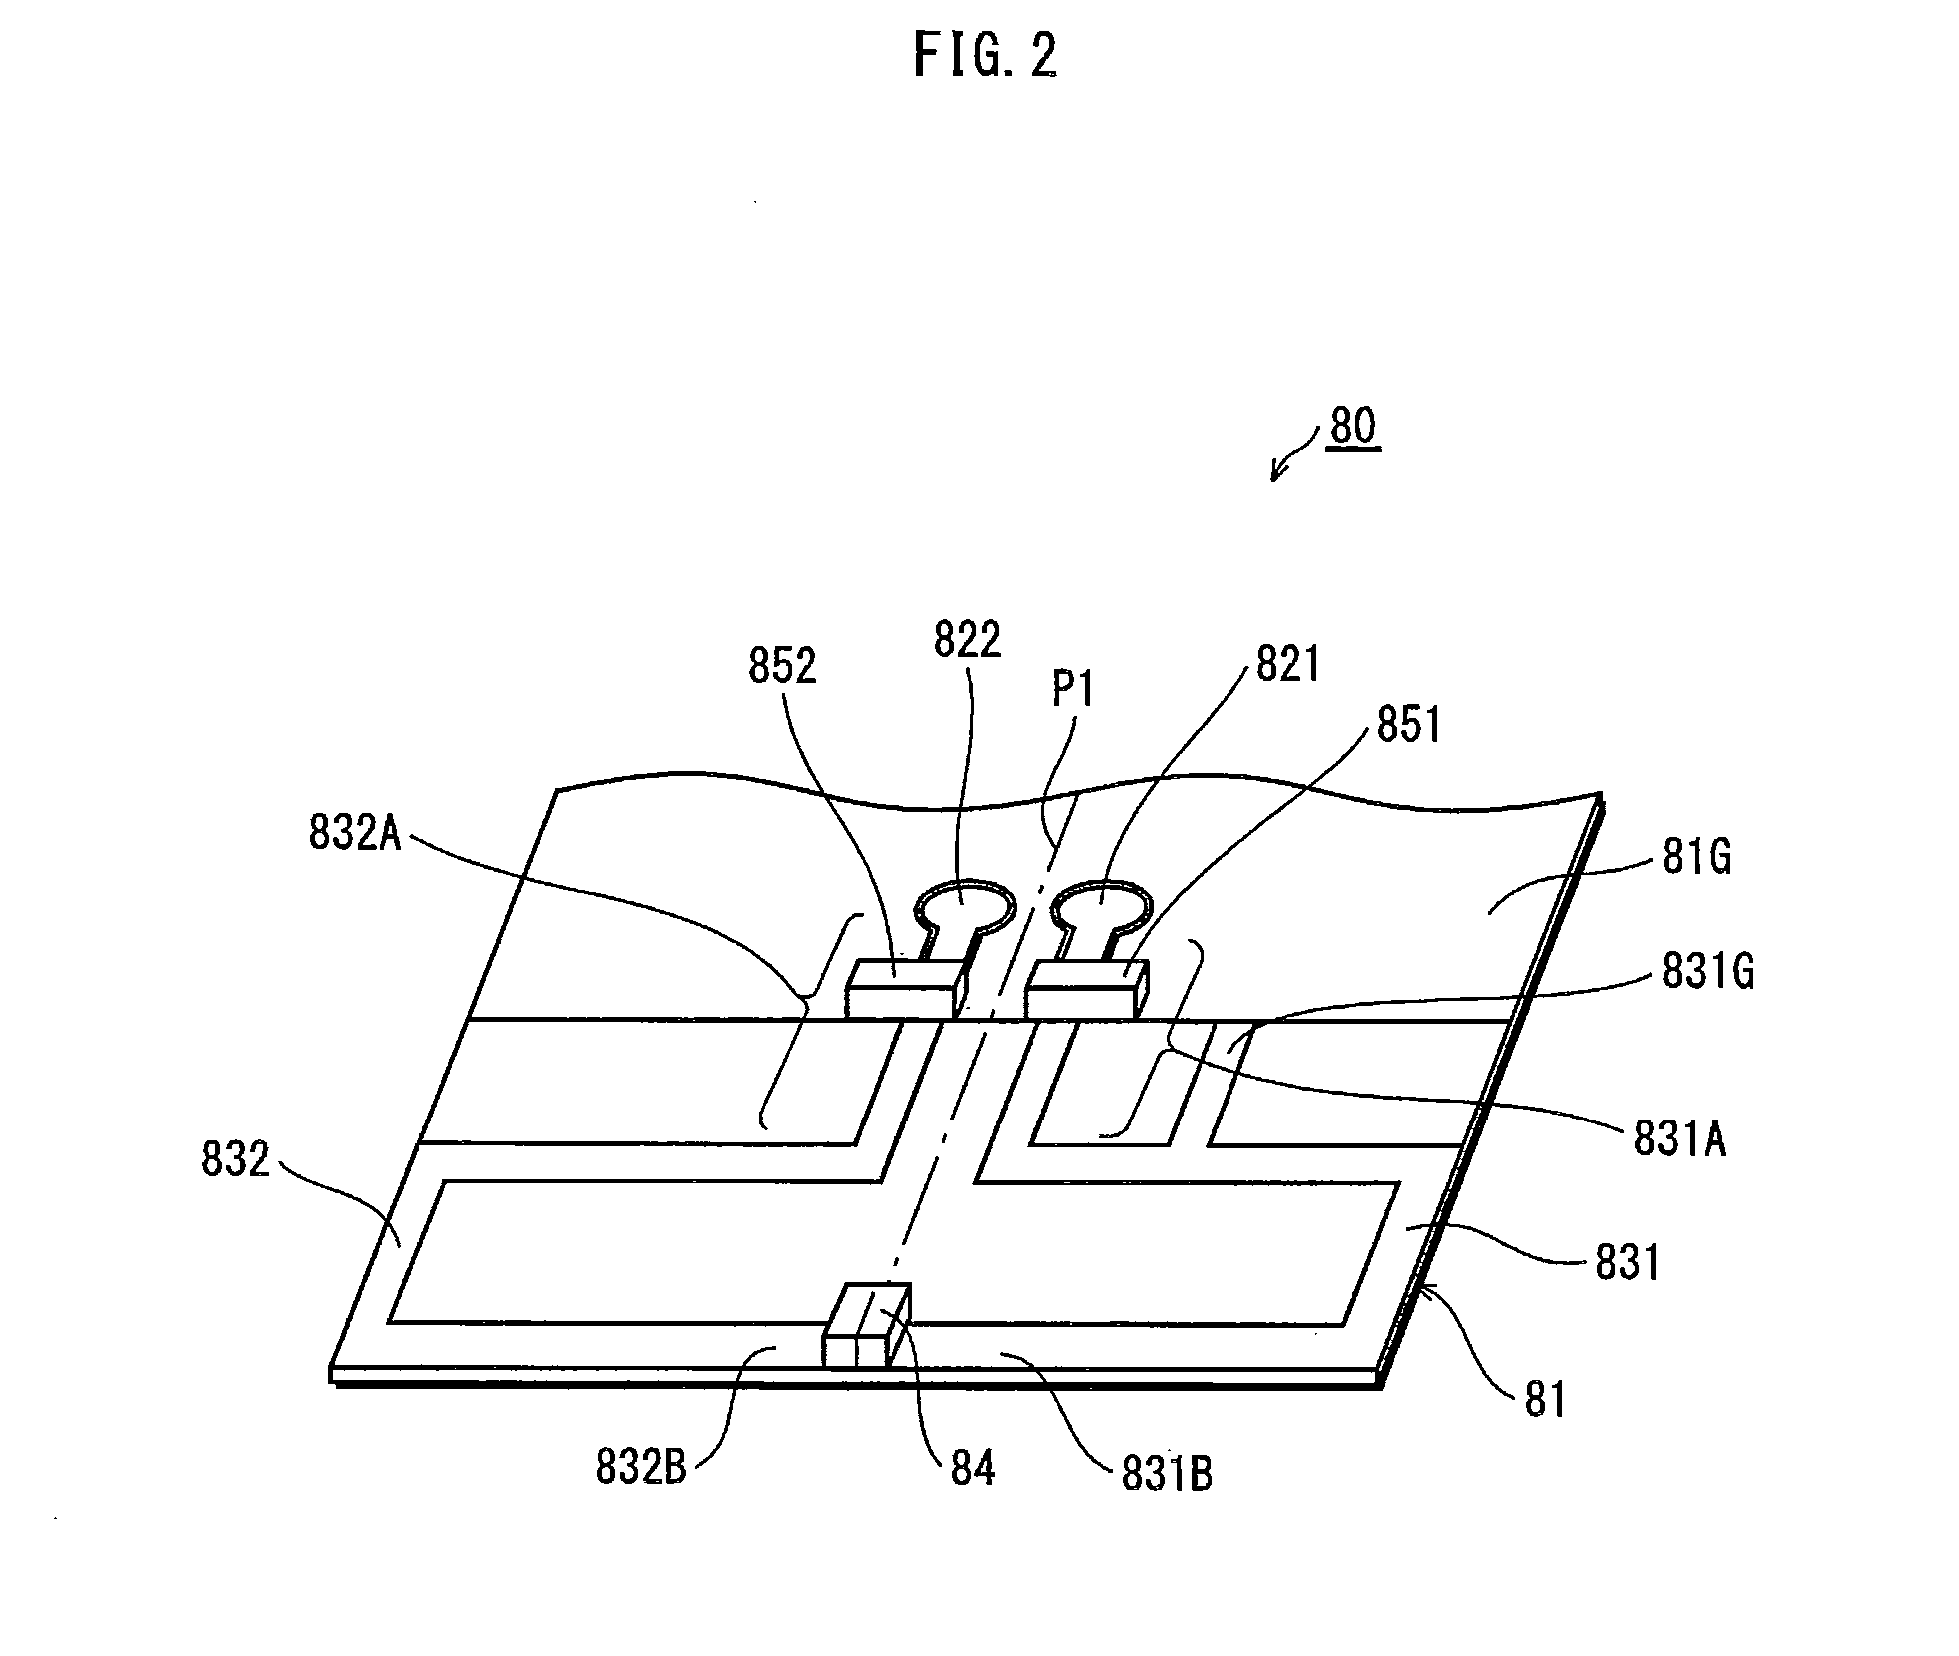 Composite antenna and portable telephone